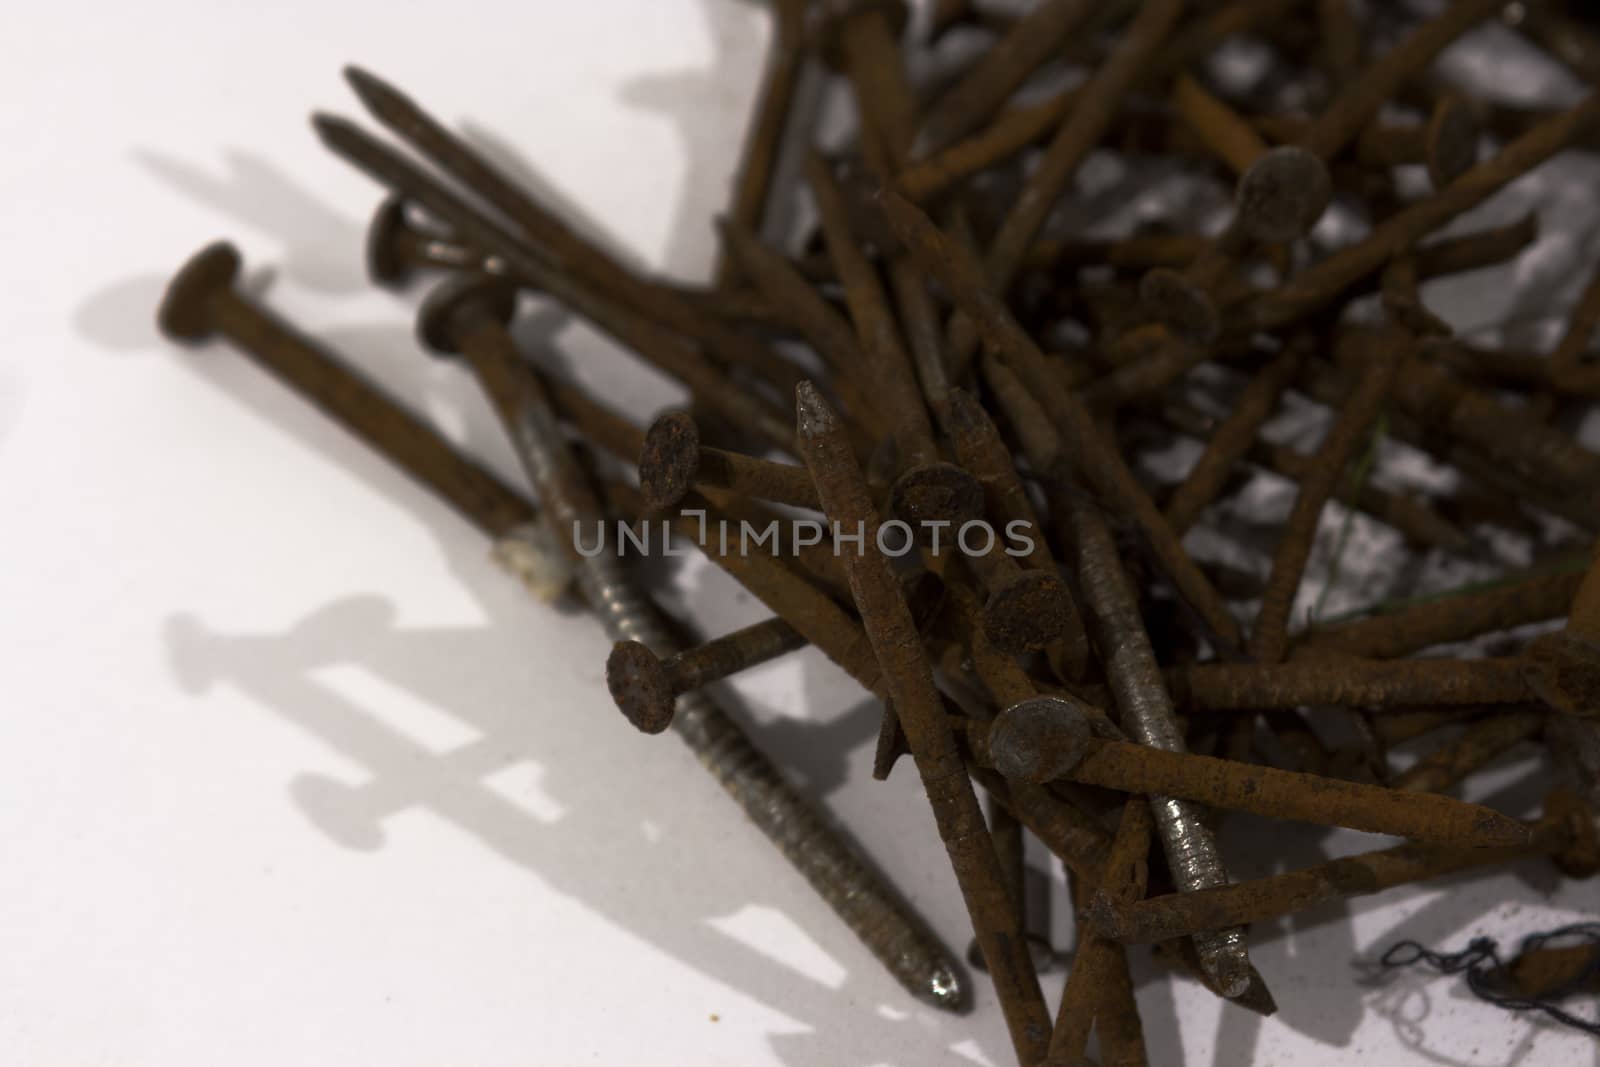 A pile of rusty nails spread out on a table